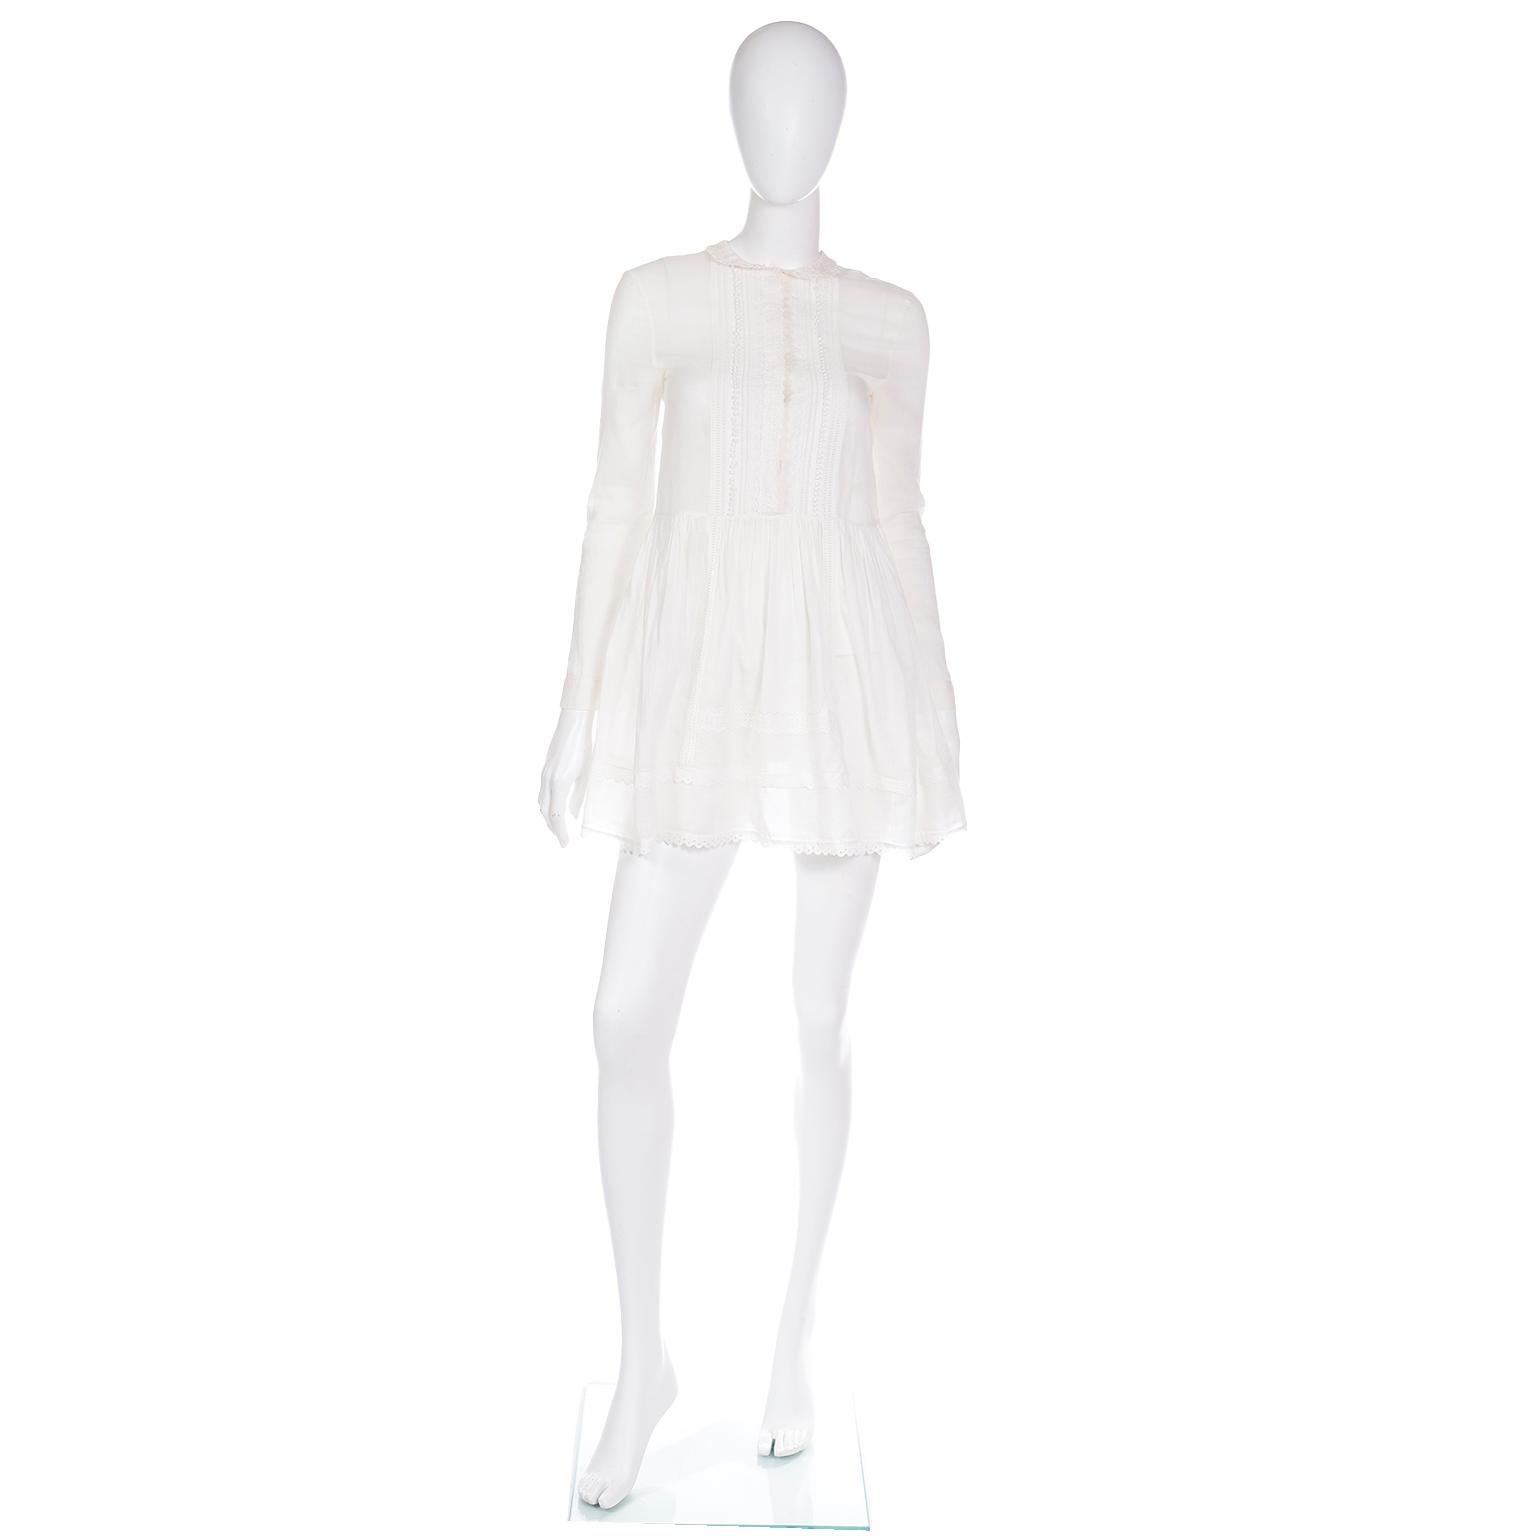 This is a lovely Saint Laurent Paris lightweight white cotton babydoll style tunic blouse with a variety of fine lace trim. This top is in a breathable semi-sheer fabric and it has lace detailing at the Peter Pan collar, hemline, and bodice front.